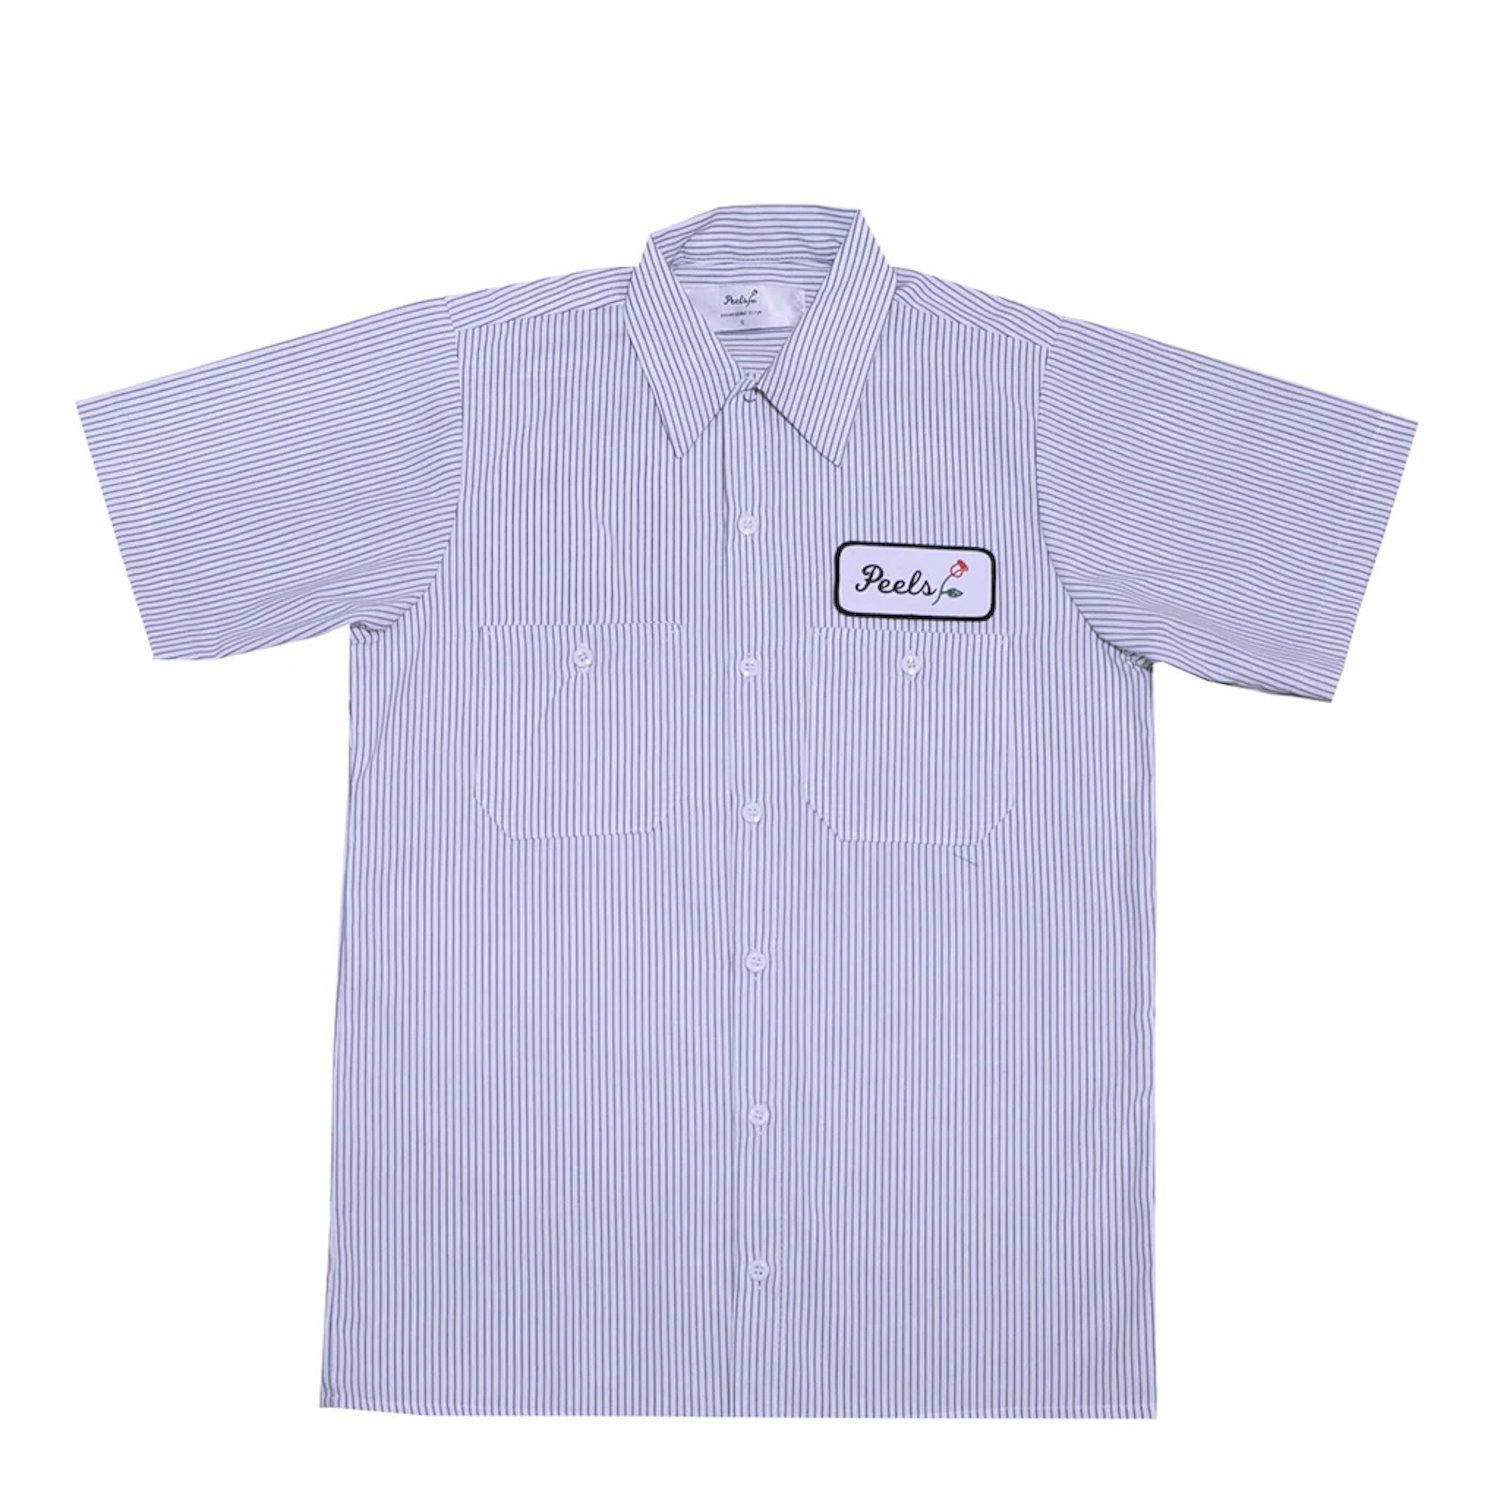 Peels<br>Original Stripe Shirt with Rose Patch<br>